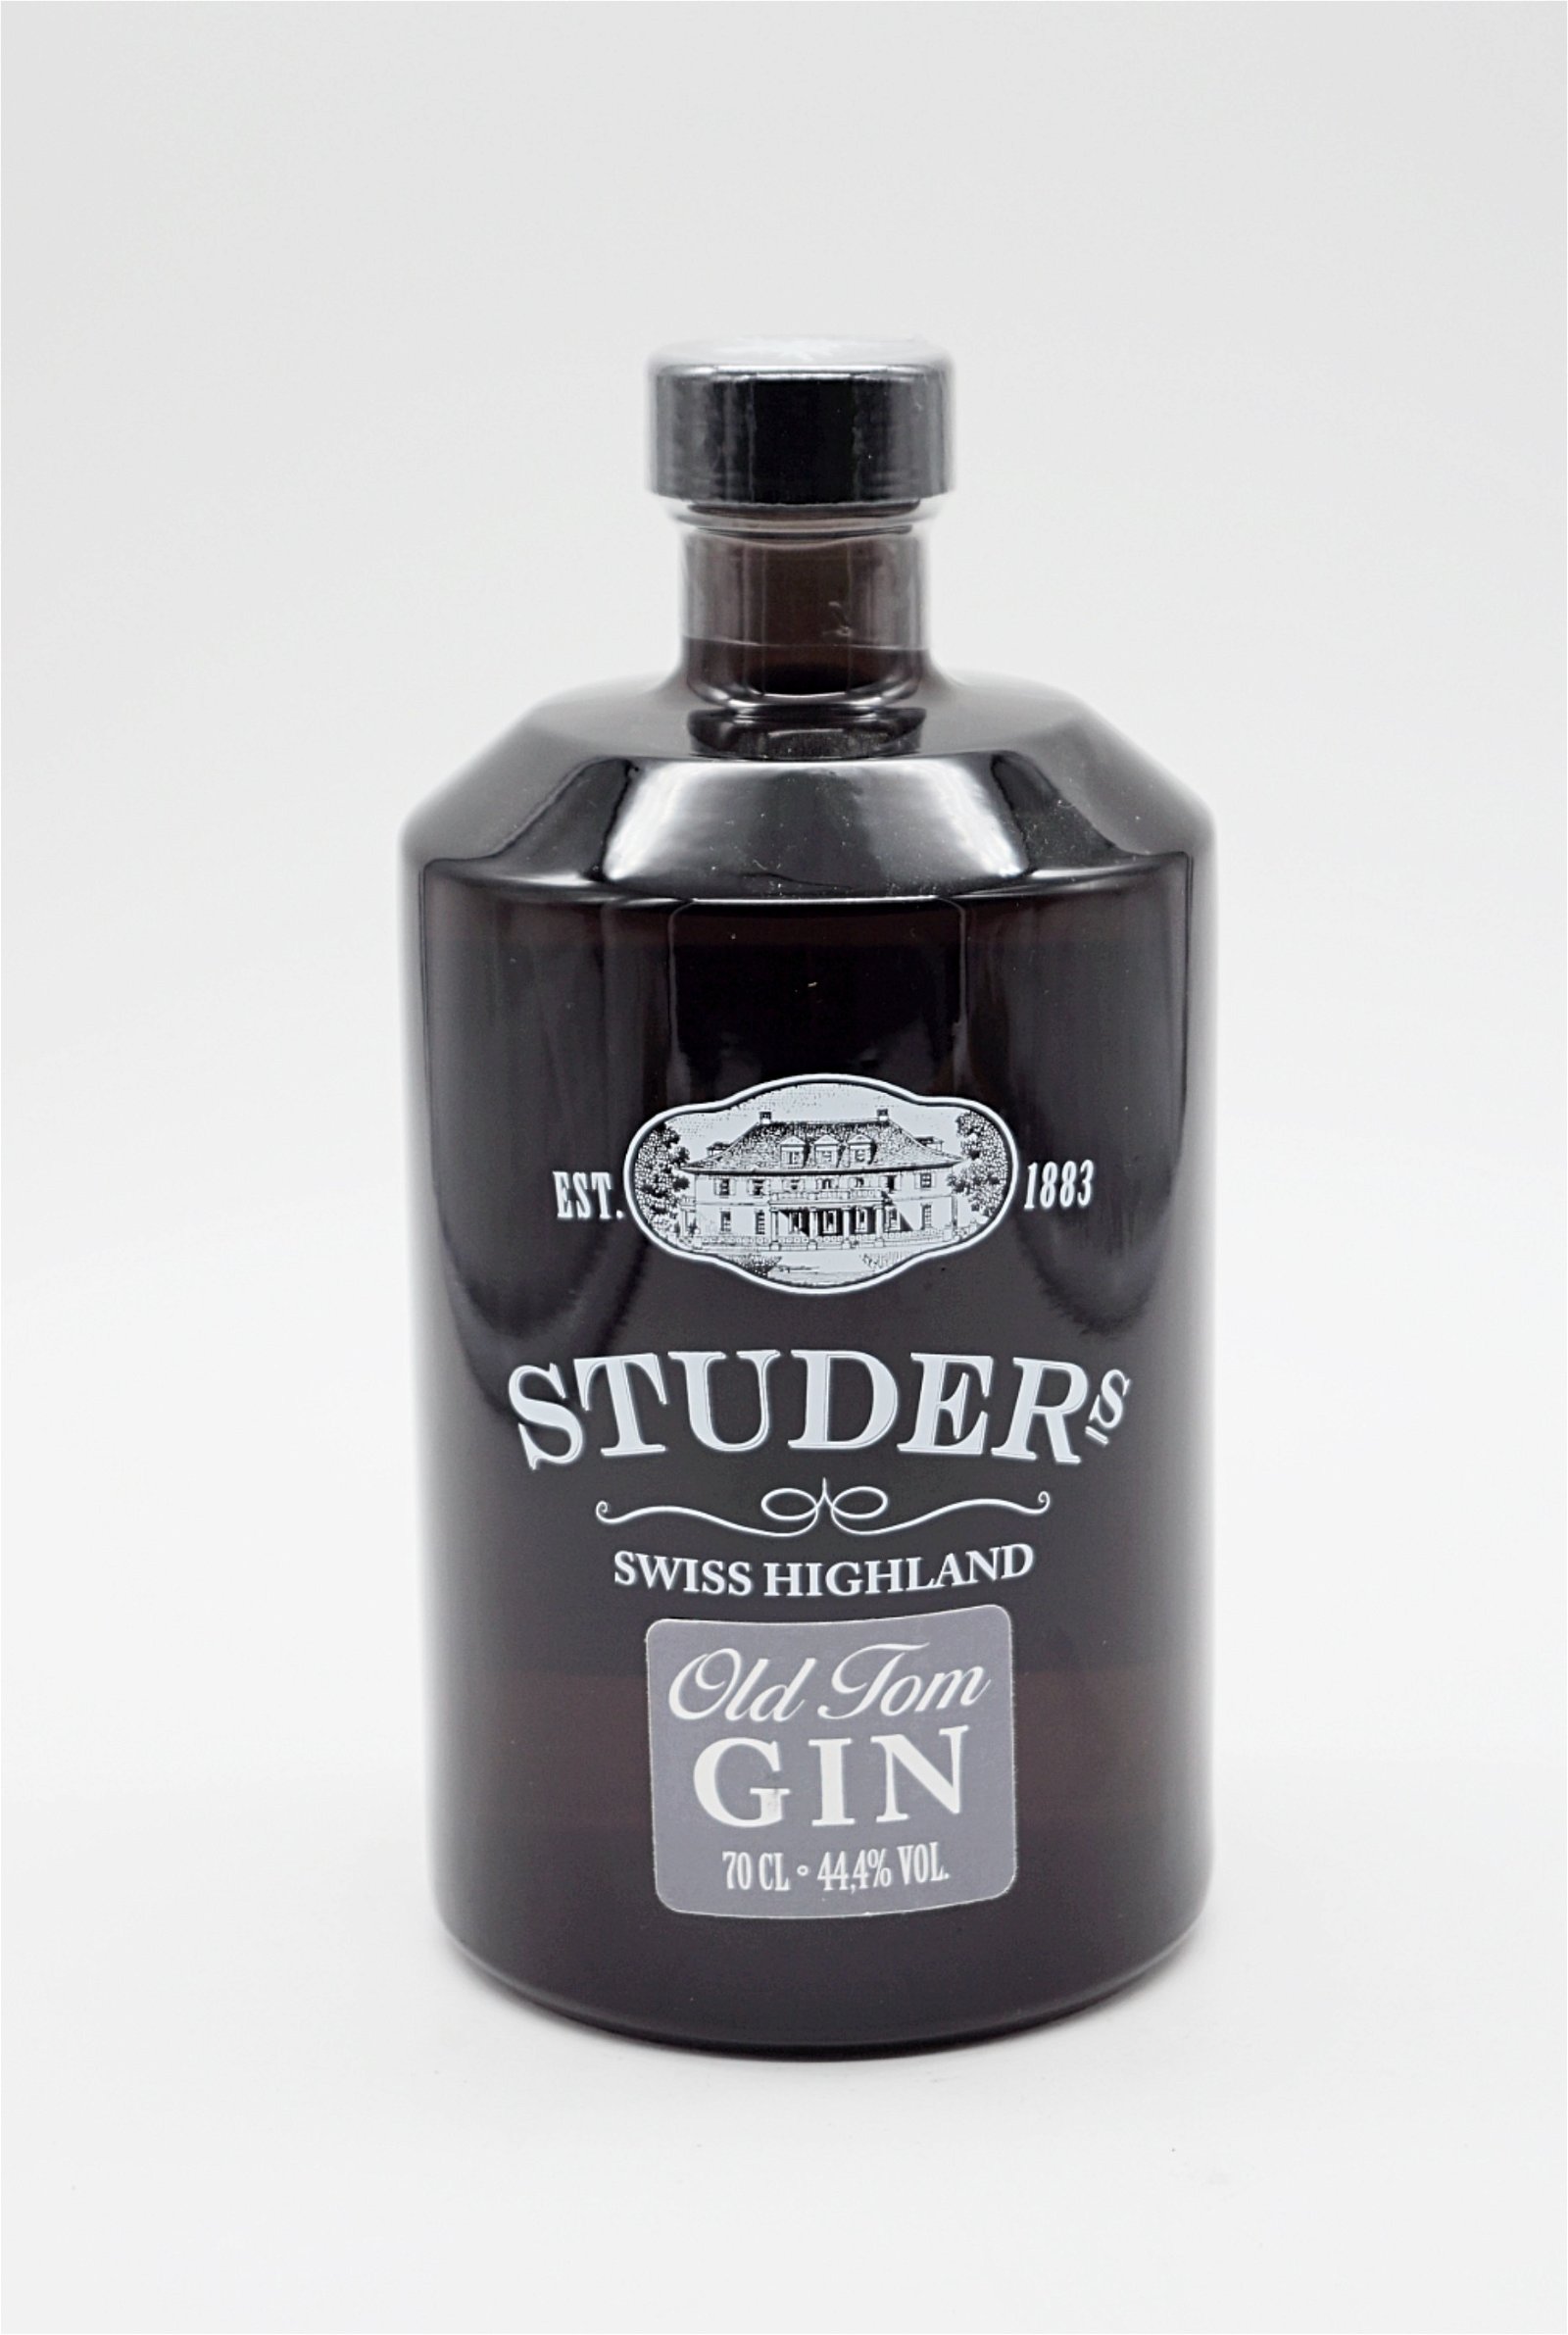 Studers Old Tom Gin